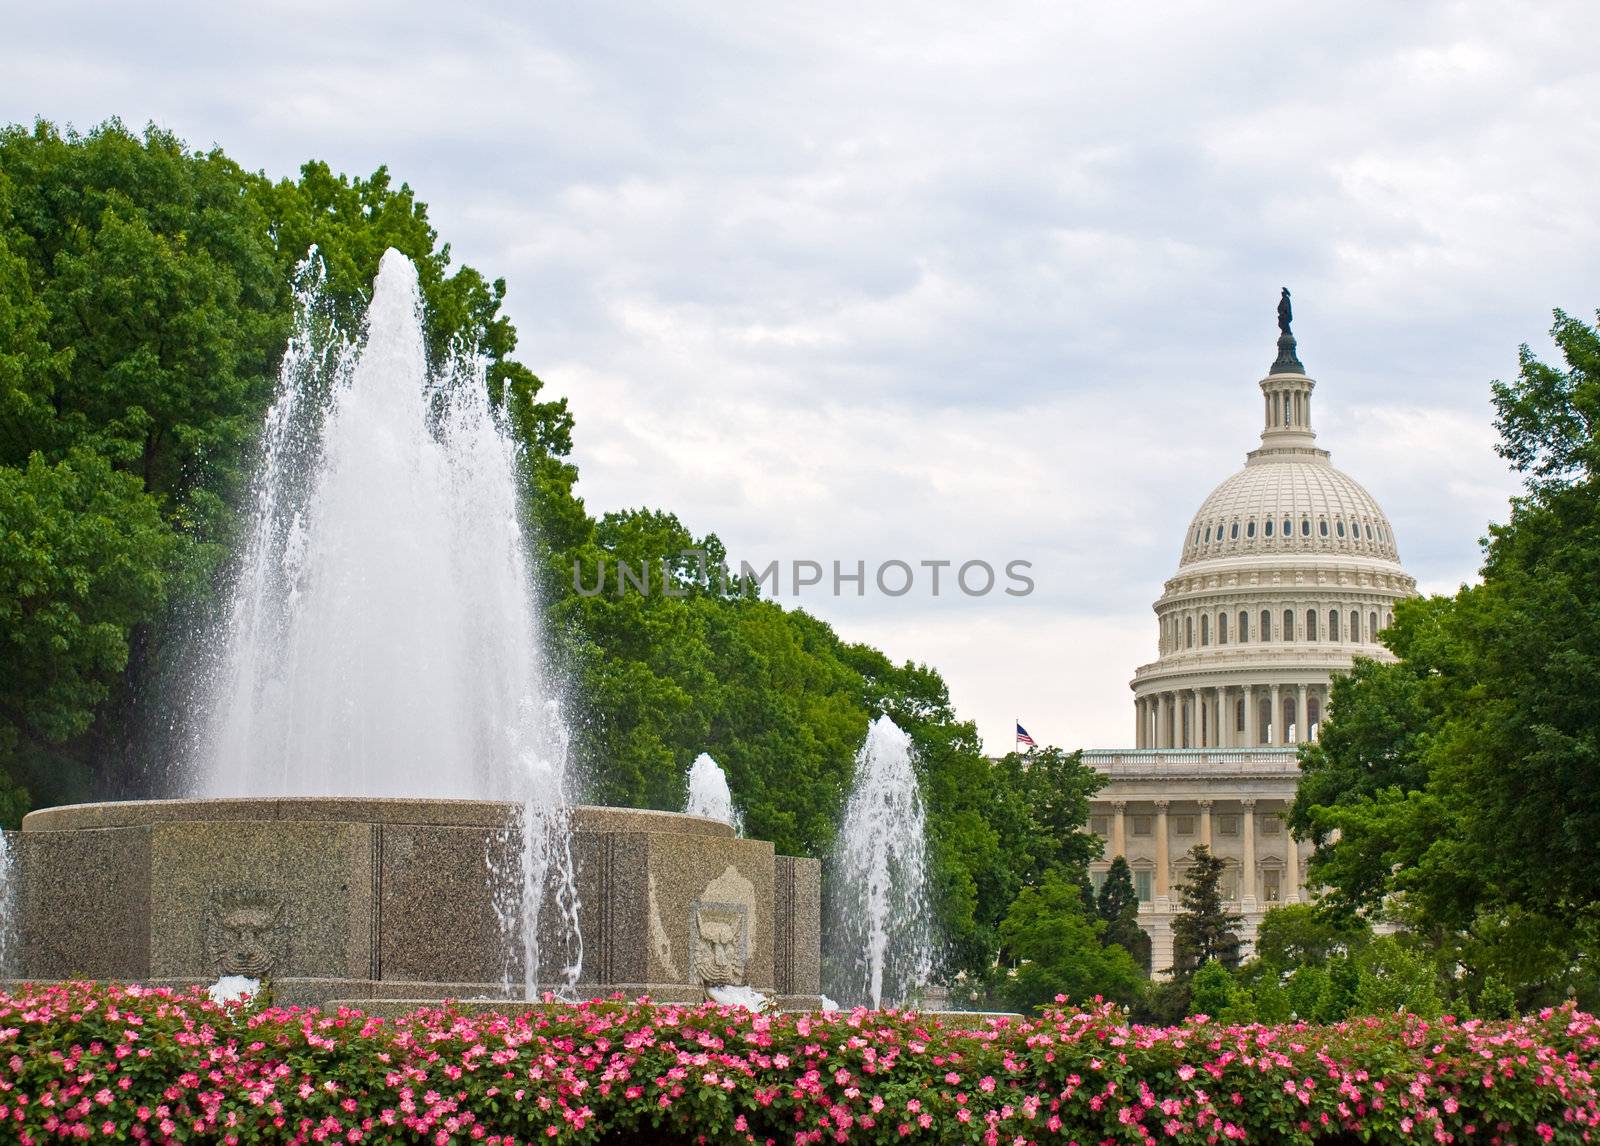 United States Capitol Building and Fountain in Washington DC